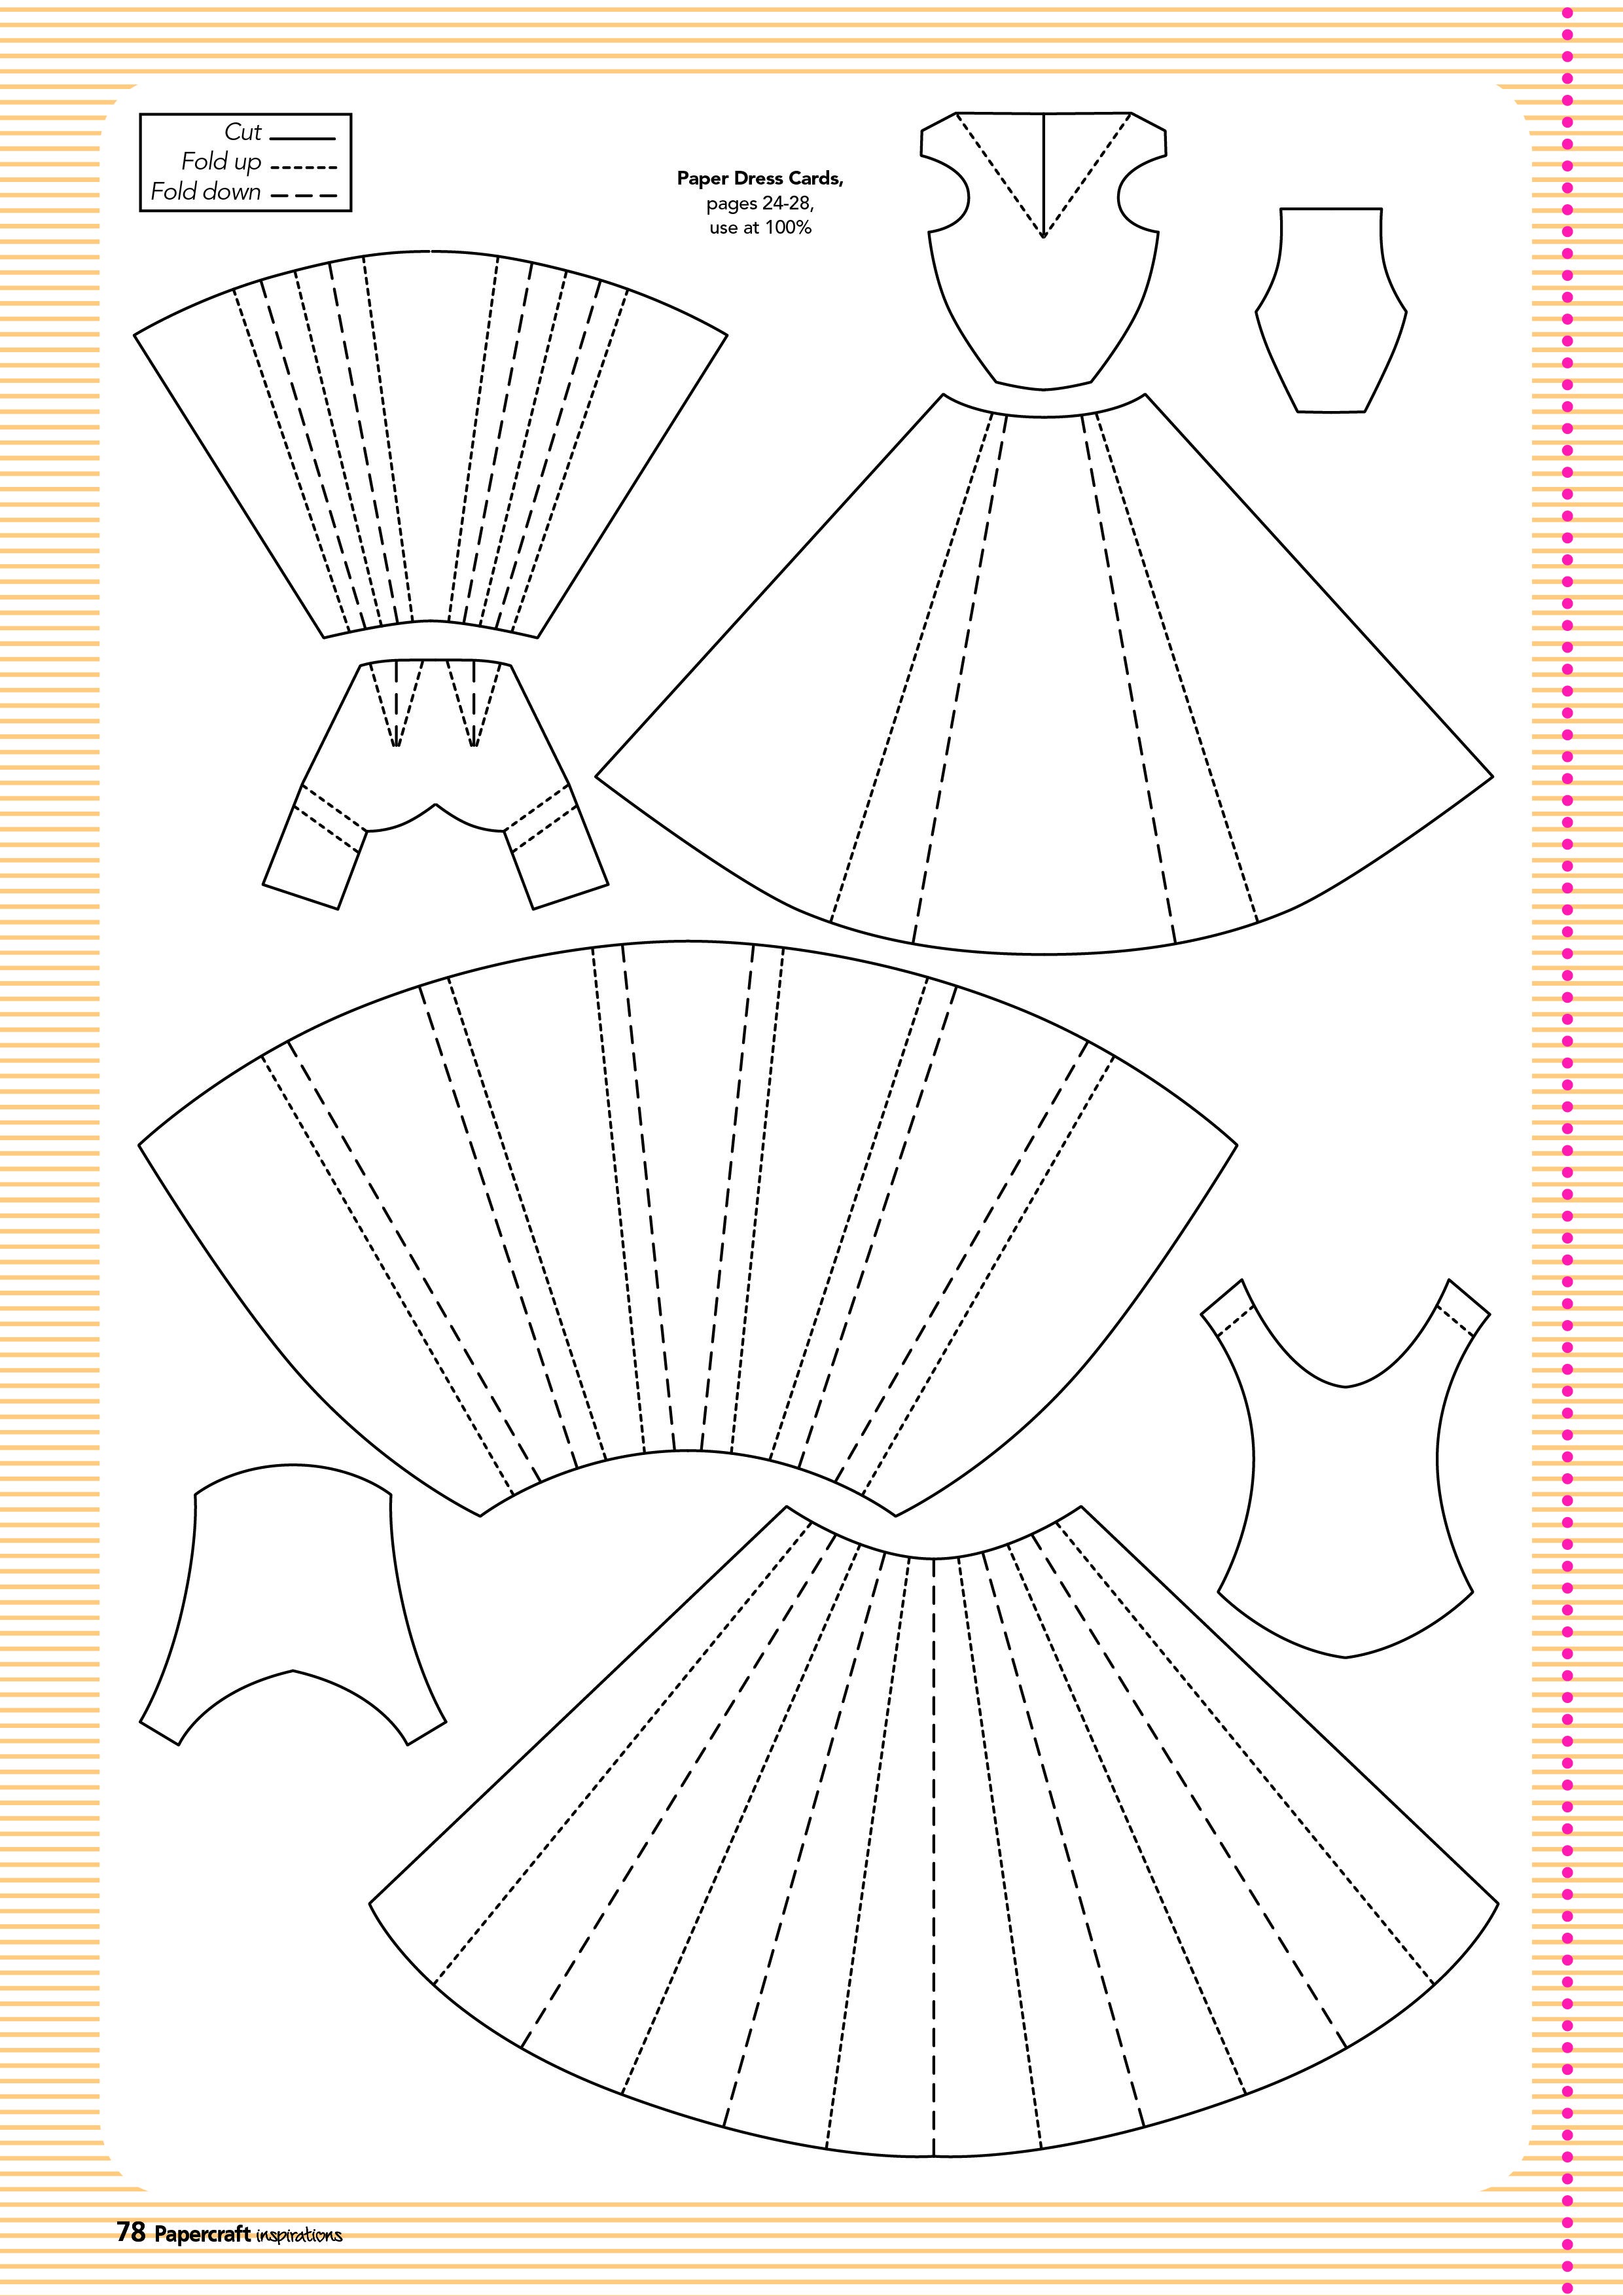 Advanced Papercraft Free Templates From Papercraft Inspirations 129